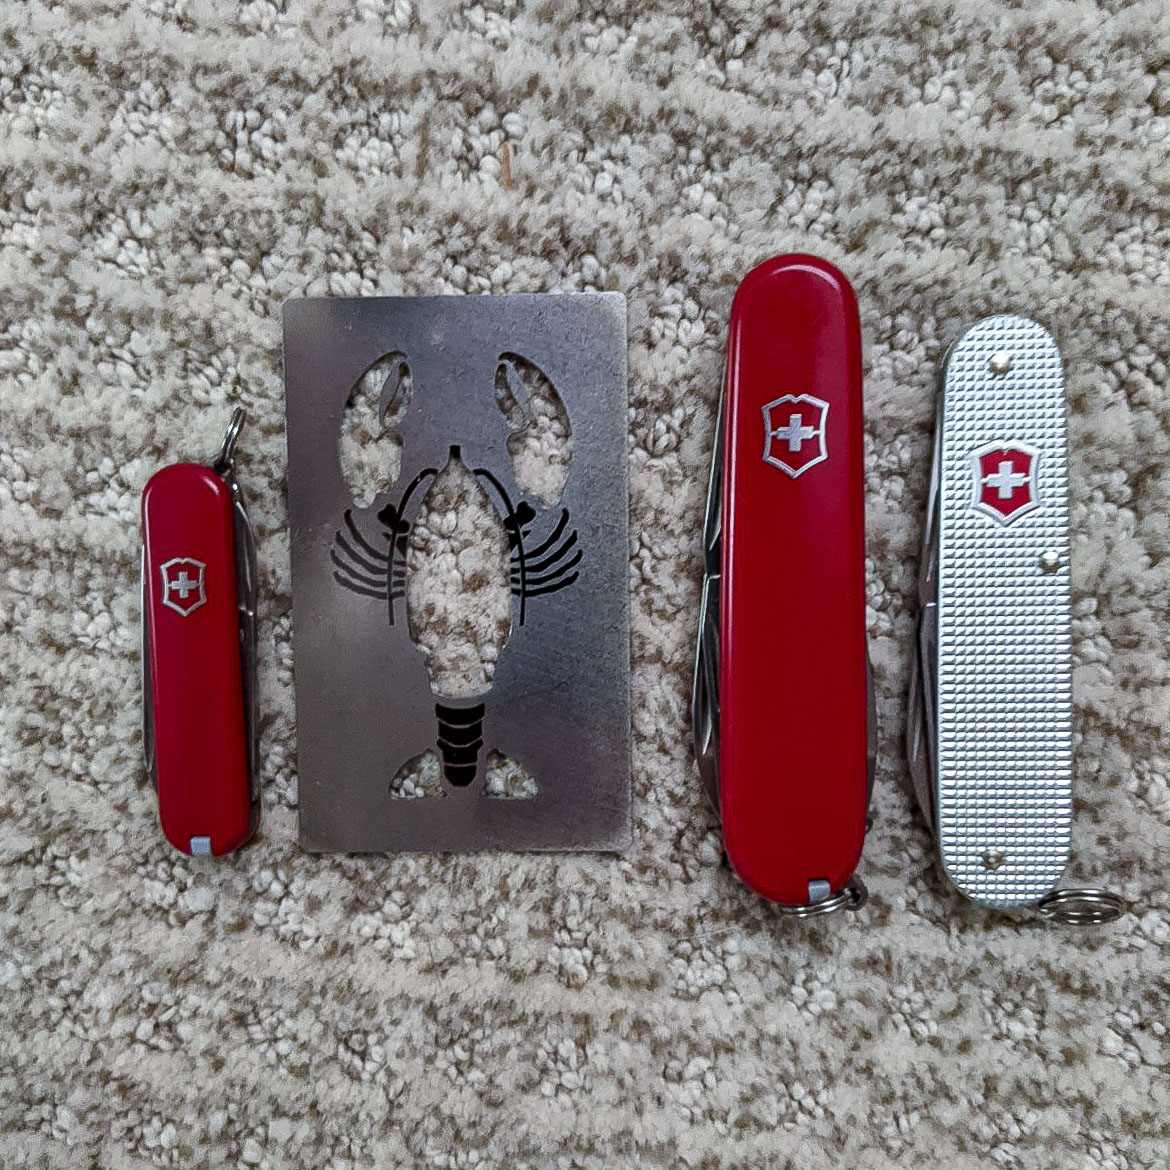 https://www.themodestman.com/wp-content/uploads/2021/05/Swiss-Army-Knife-collection.jpg